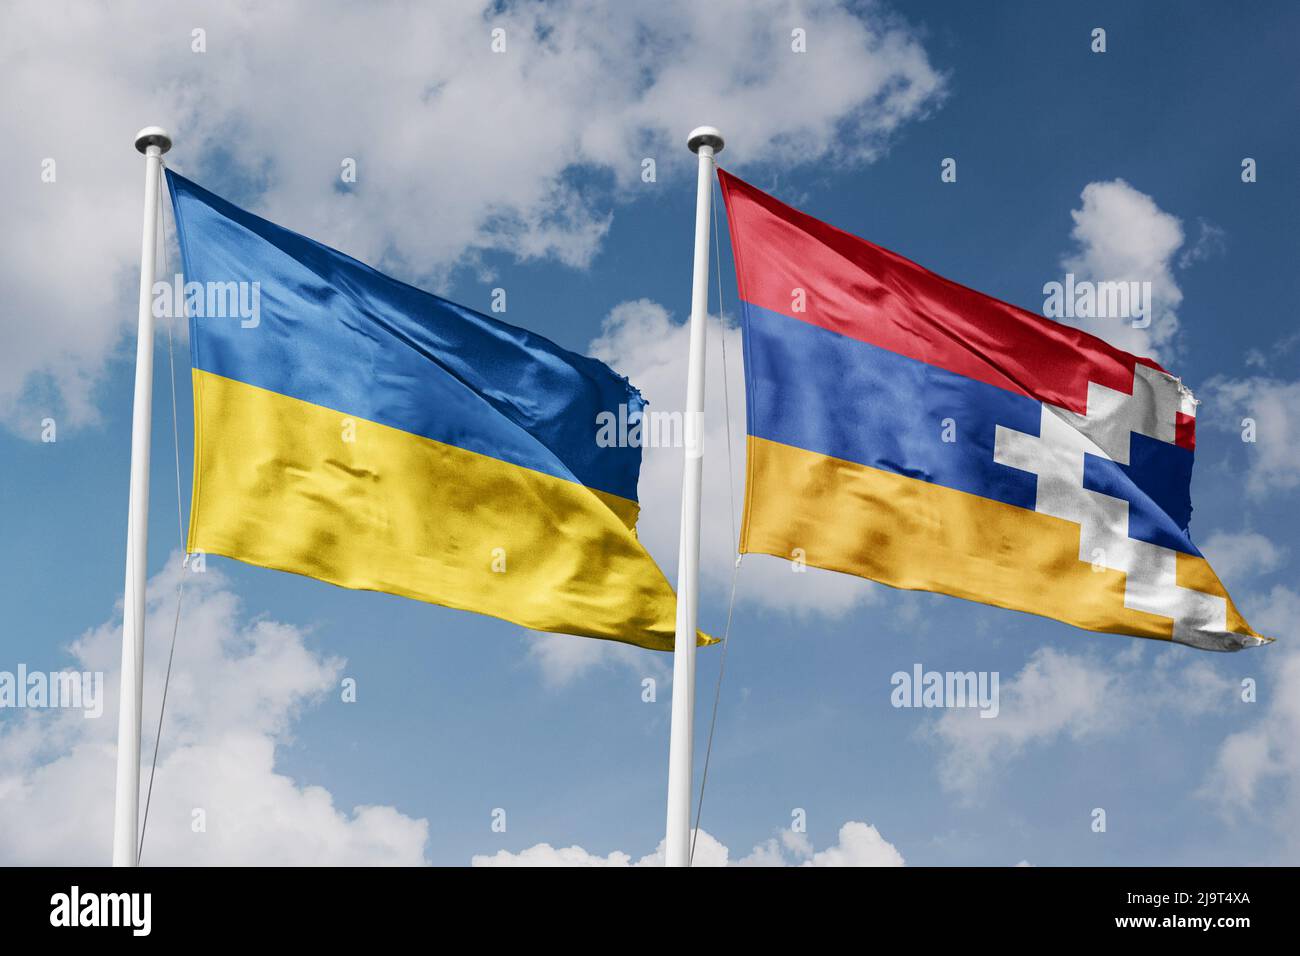 Ukraine and Artsakh two flags on flagpoles and blue cloudy sky background Stock Photo